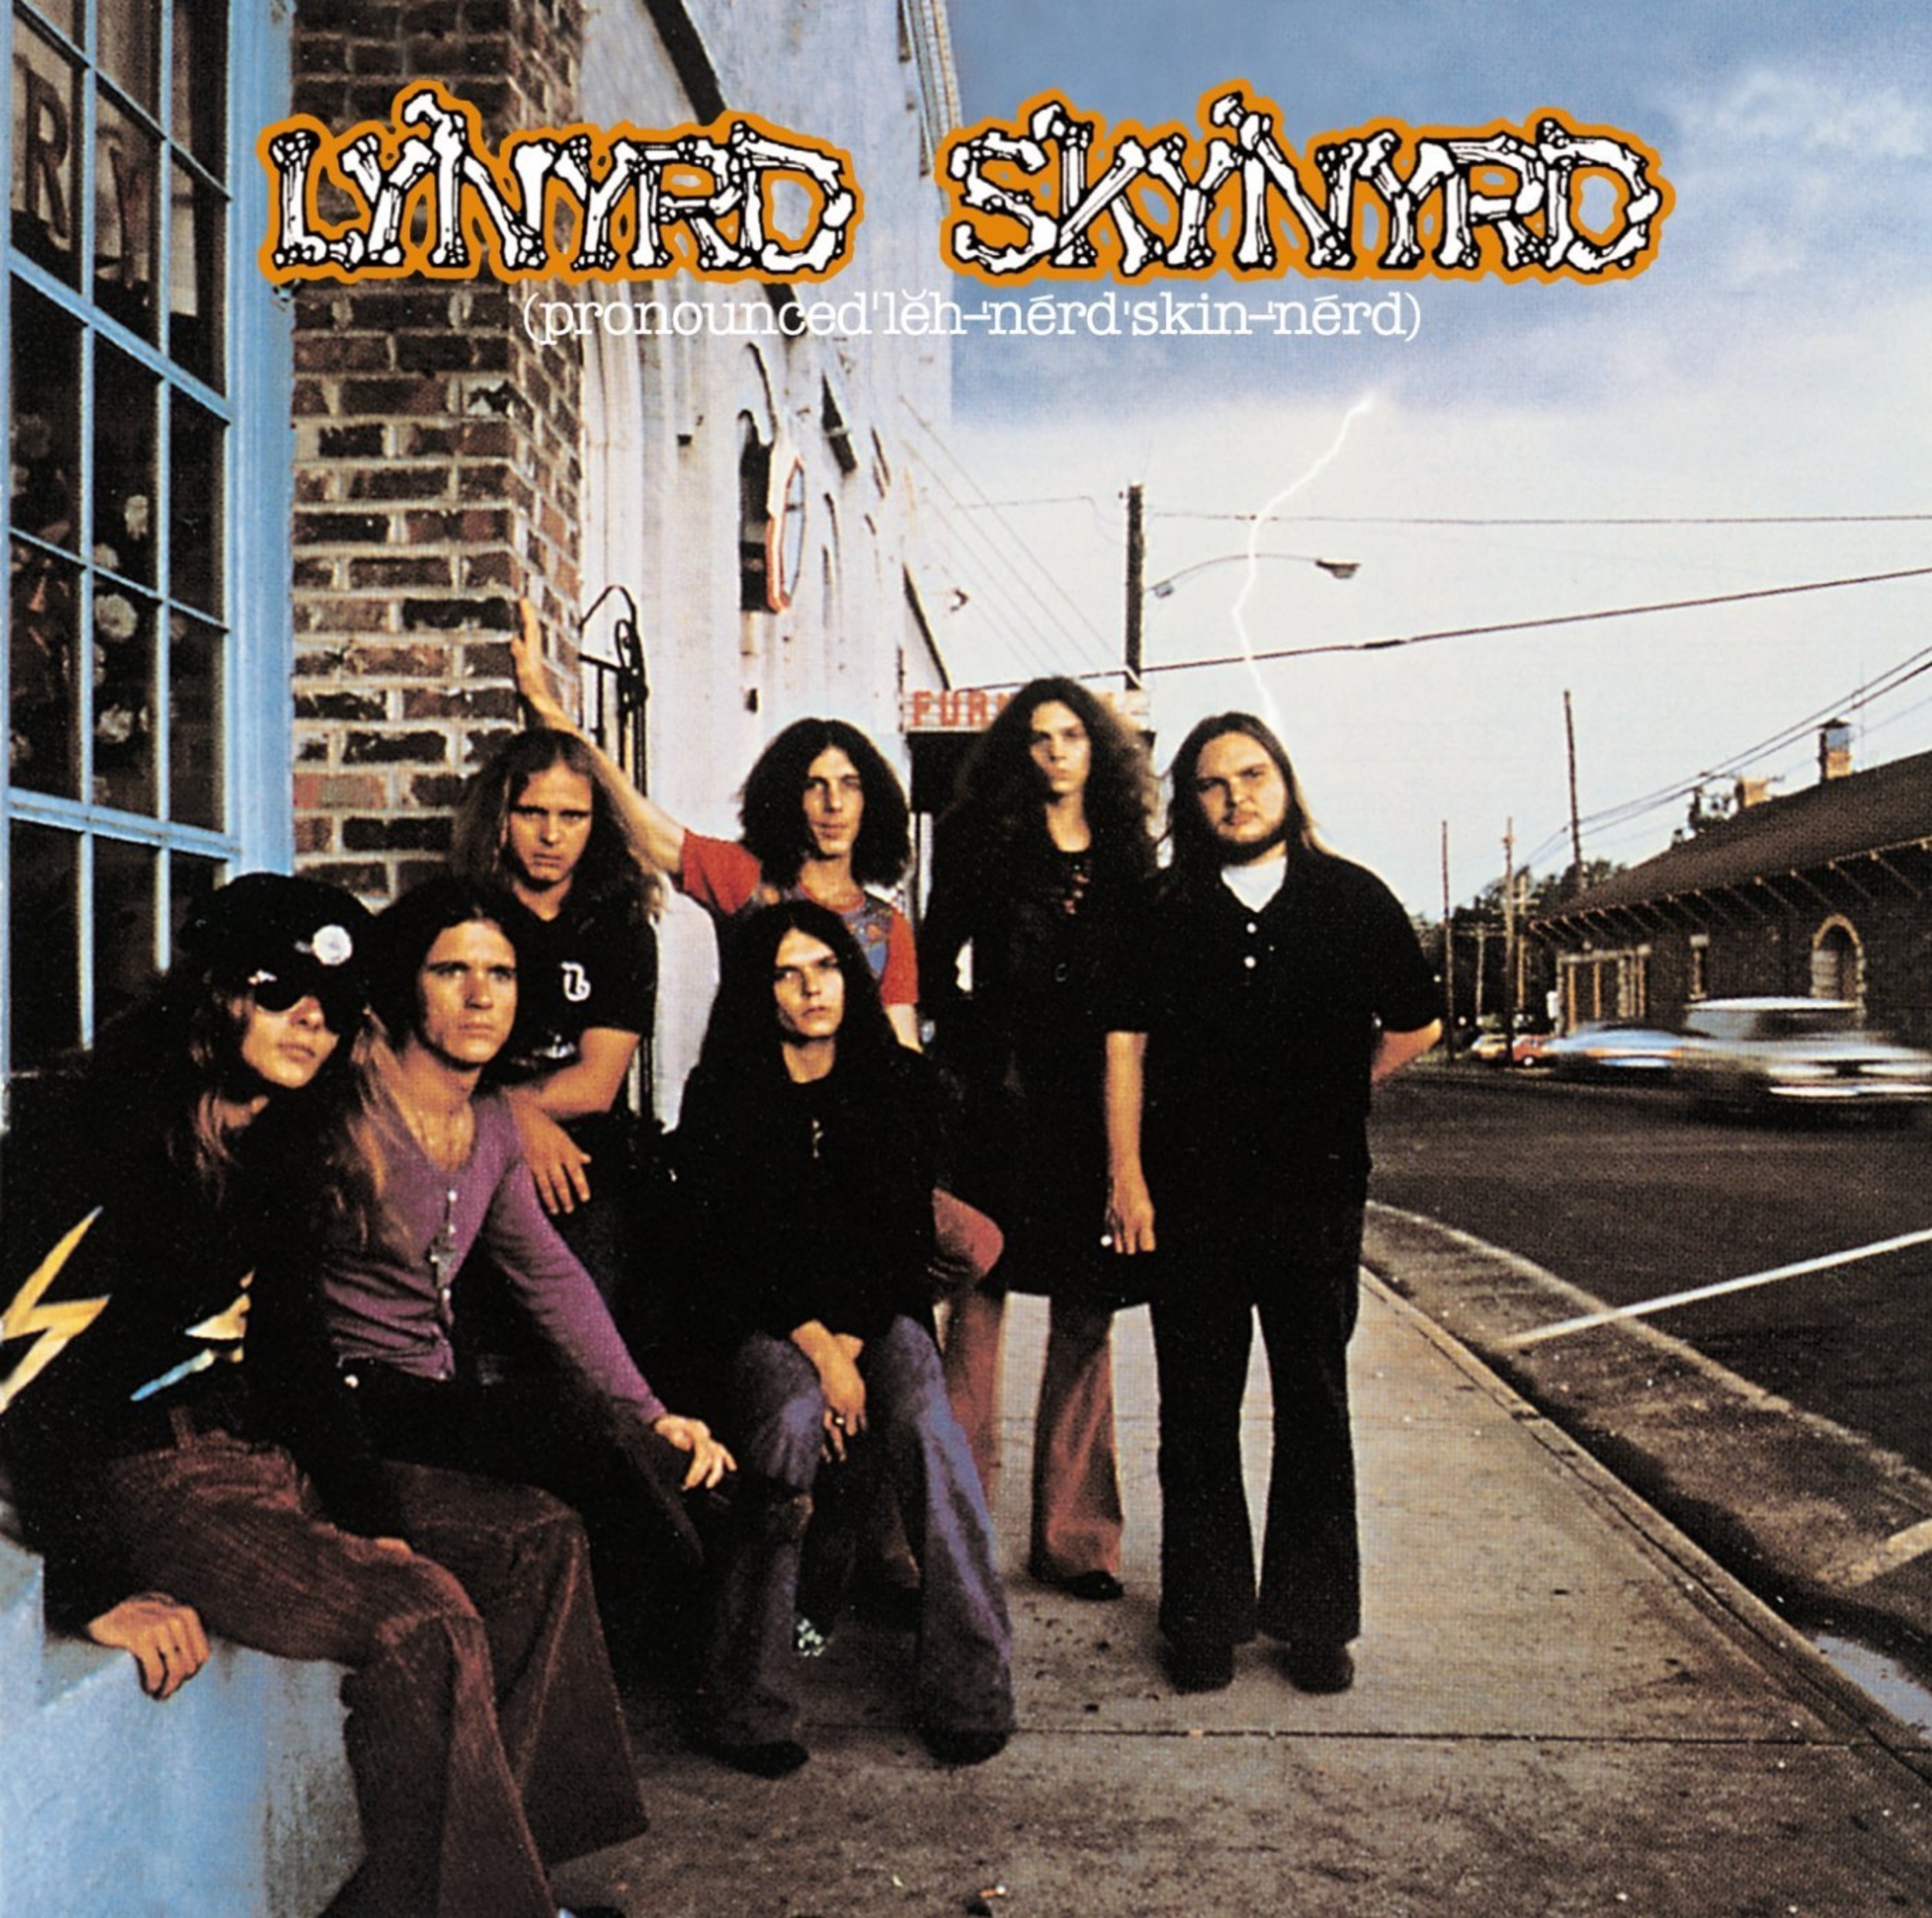 <p>Another special moment from Skynyrd's debut album. Along the lines of "Free Bird," the song is rather straightforward in terms of meaning. Don't necessarily be someone you're not — an approach Ronnie Van Zant took to heart, for better or worse. "<a href="https://www.youtube.com/watch?v=j1GfheKHDu0">Simple Man</a>" is also a perfect example of Gary Rossington's solid guitar work. Like the title, Rossington's playing on this piece is simply solid, without drawing too much attention to itself. </p><p>You may also like: <a href='https://www.yardbarker.com/entertainment/articles/what_was_going_on_in_the_world_when_the_simpsons_debuted_013124/s1__38824670'>What was going on in the world when 'The Simpsons' debuted?</a></p>